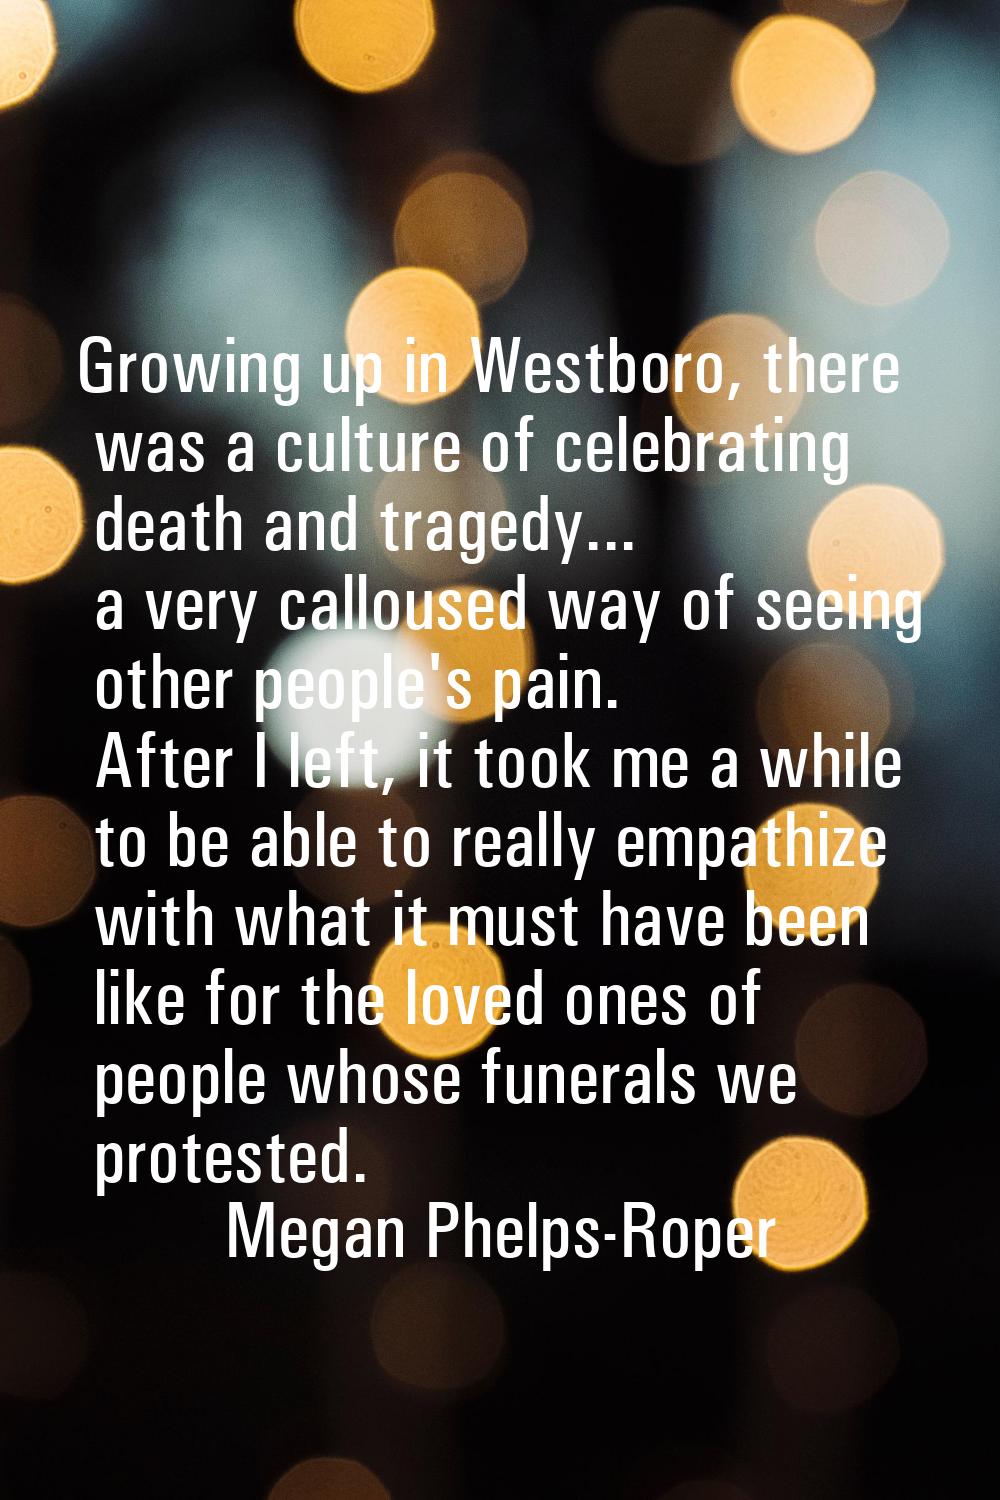 Growing up in Westboro, there was a culture of celebrating death and tragedy... a very calloused wa